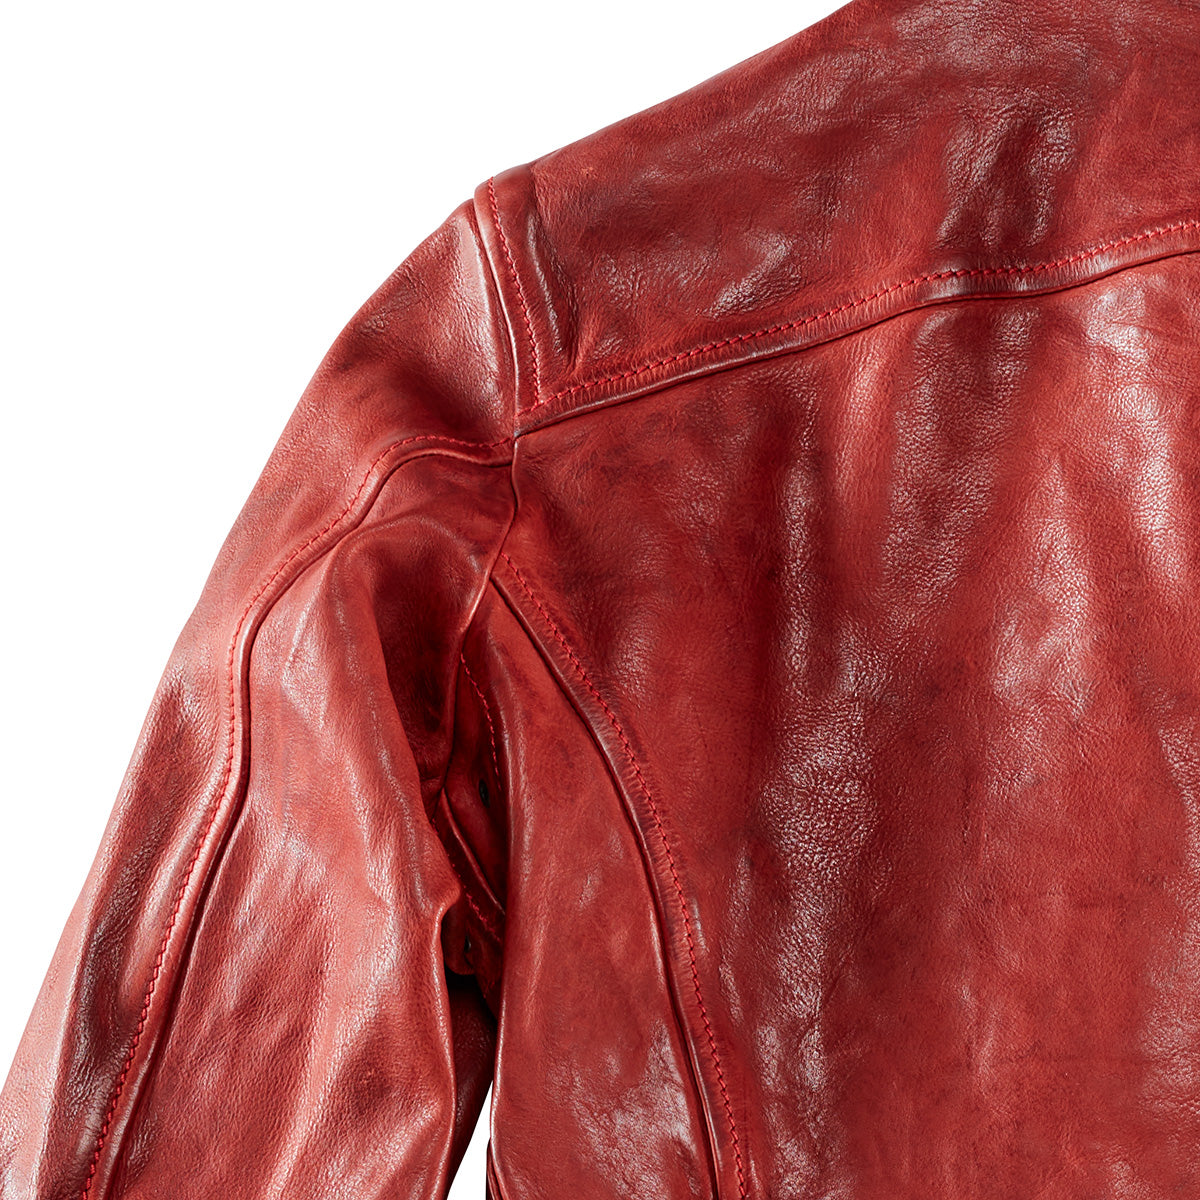 Thedi leather jacket Cafe Racer Red